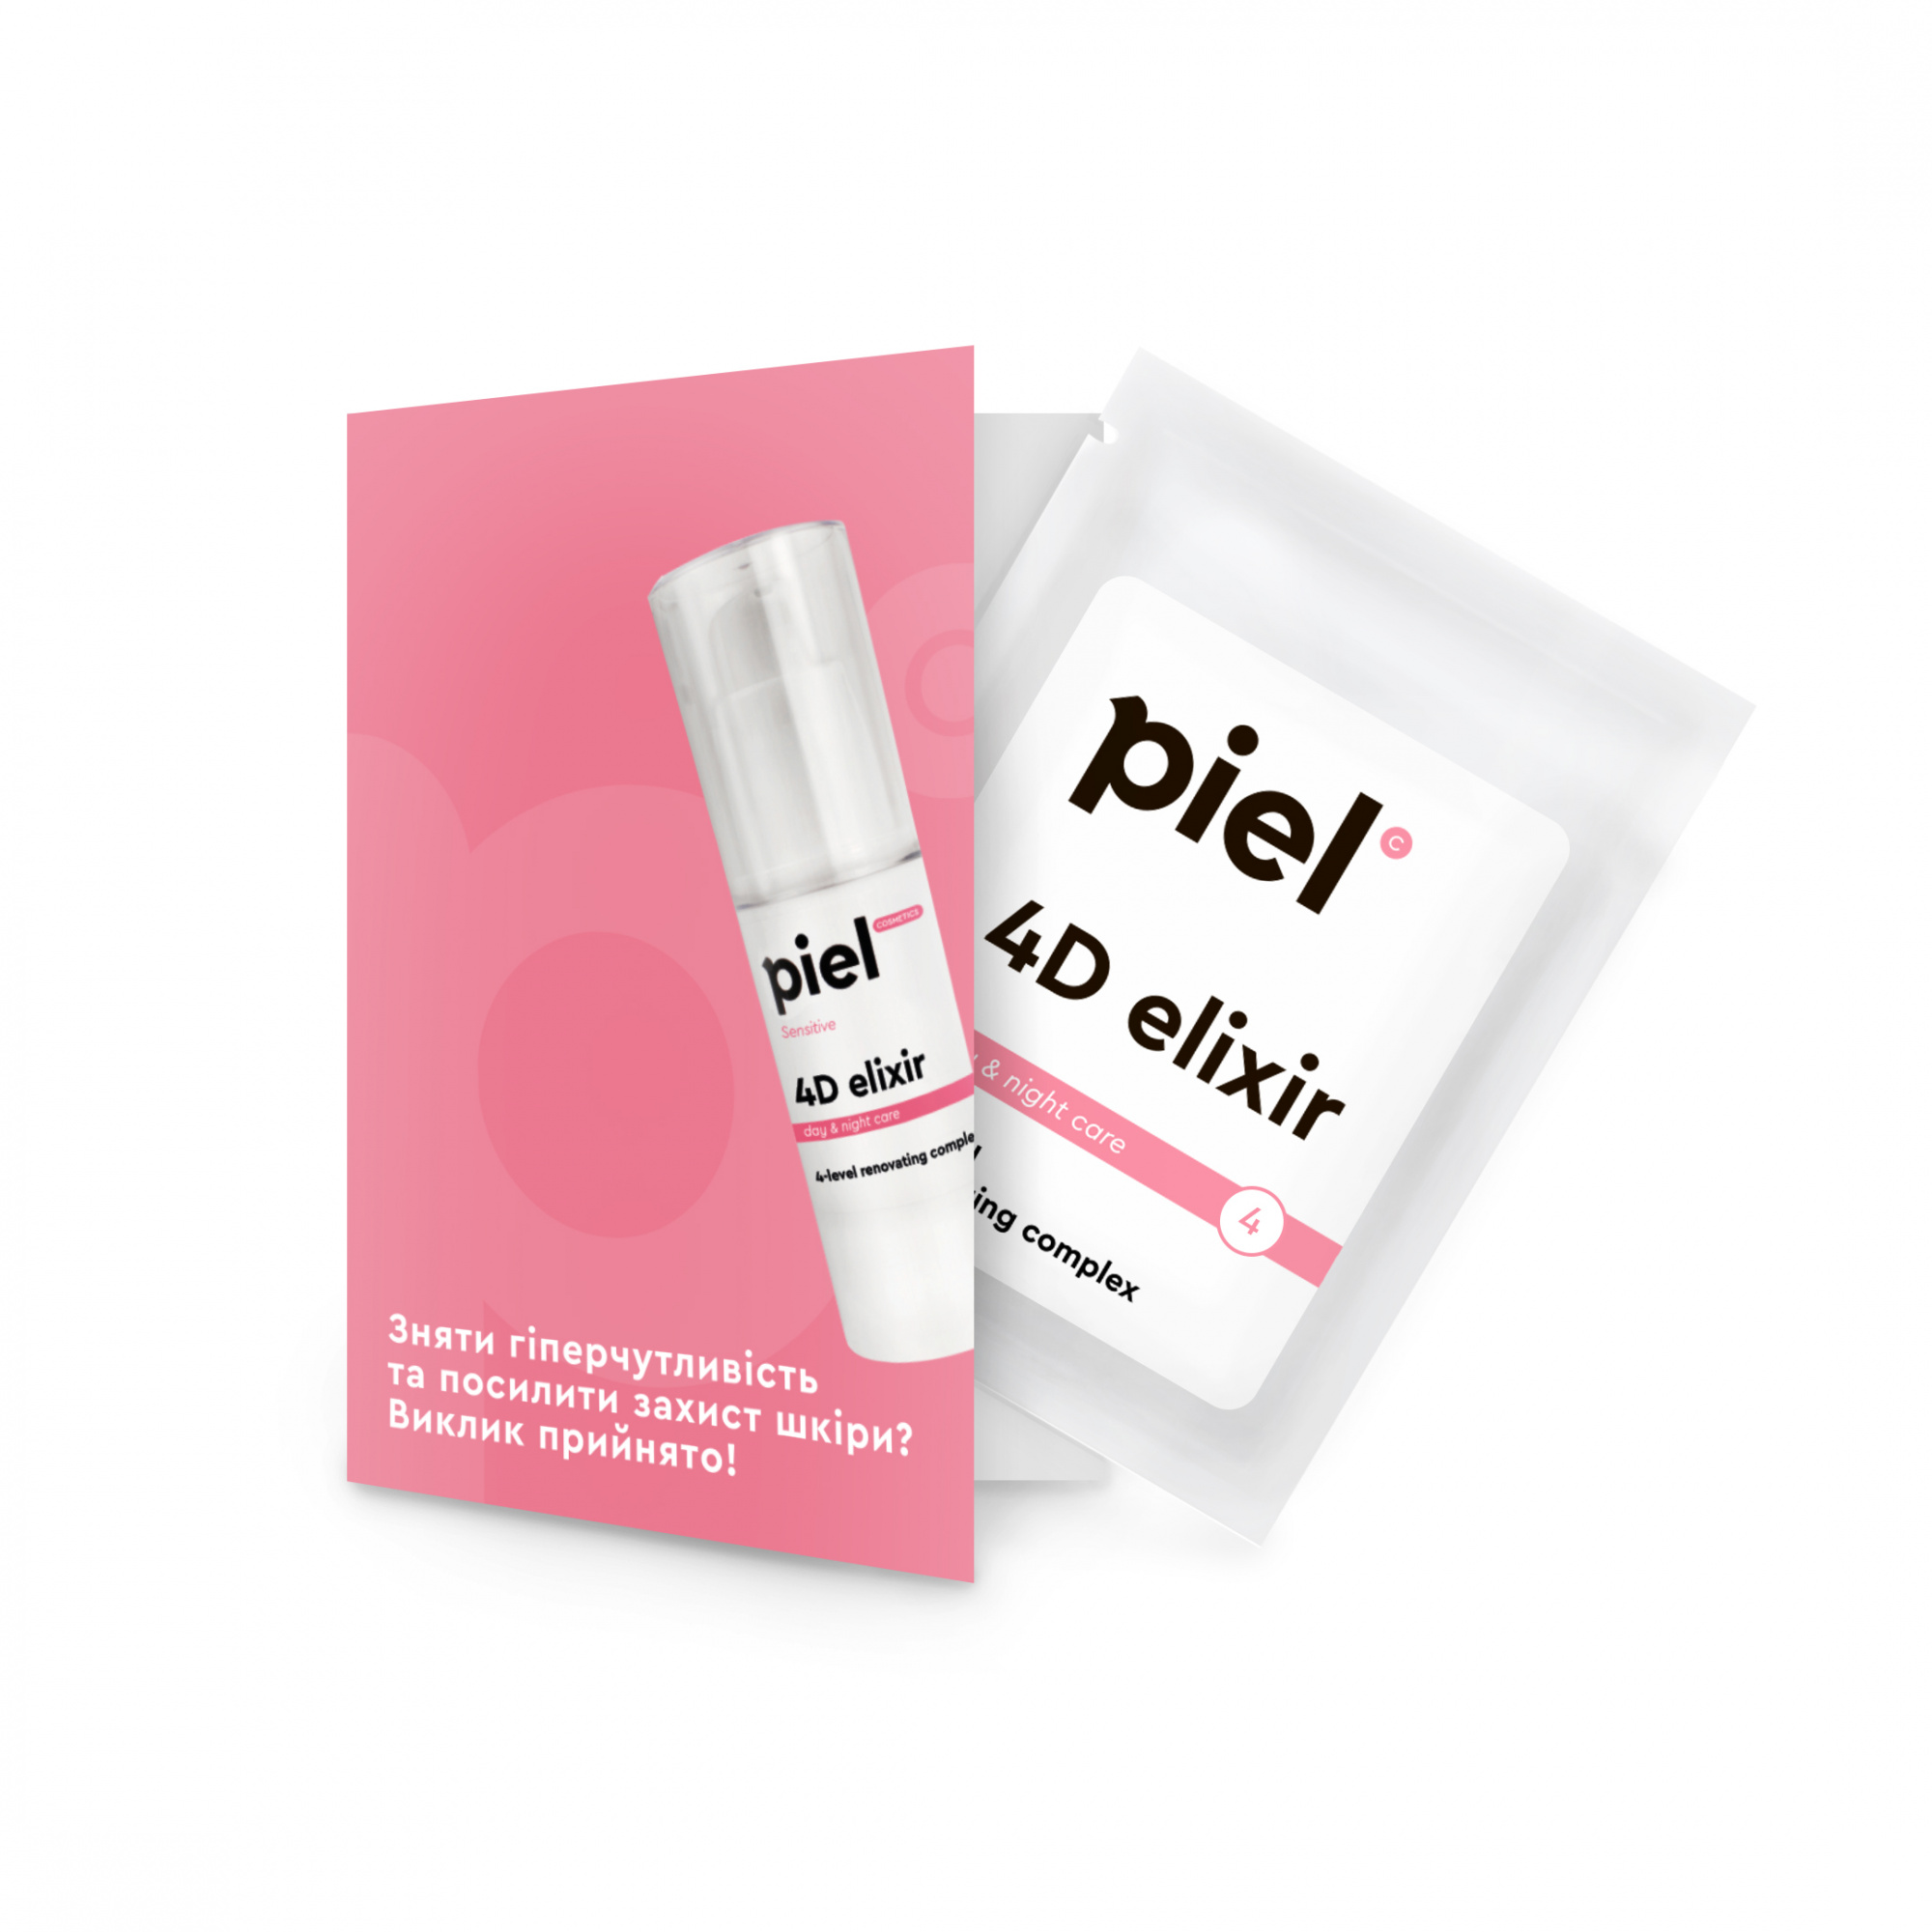 4D Elixir DNA of youth calming complex for  very sensitive skin